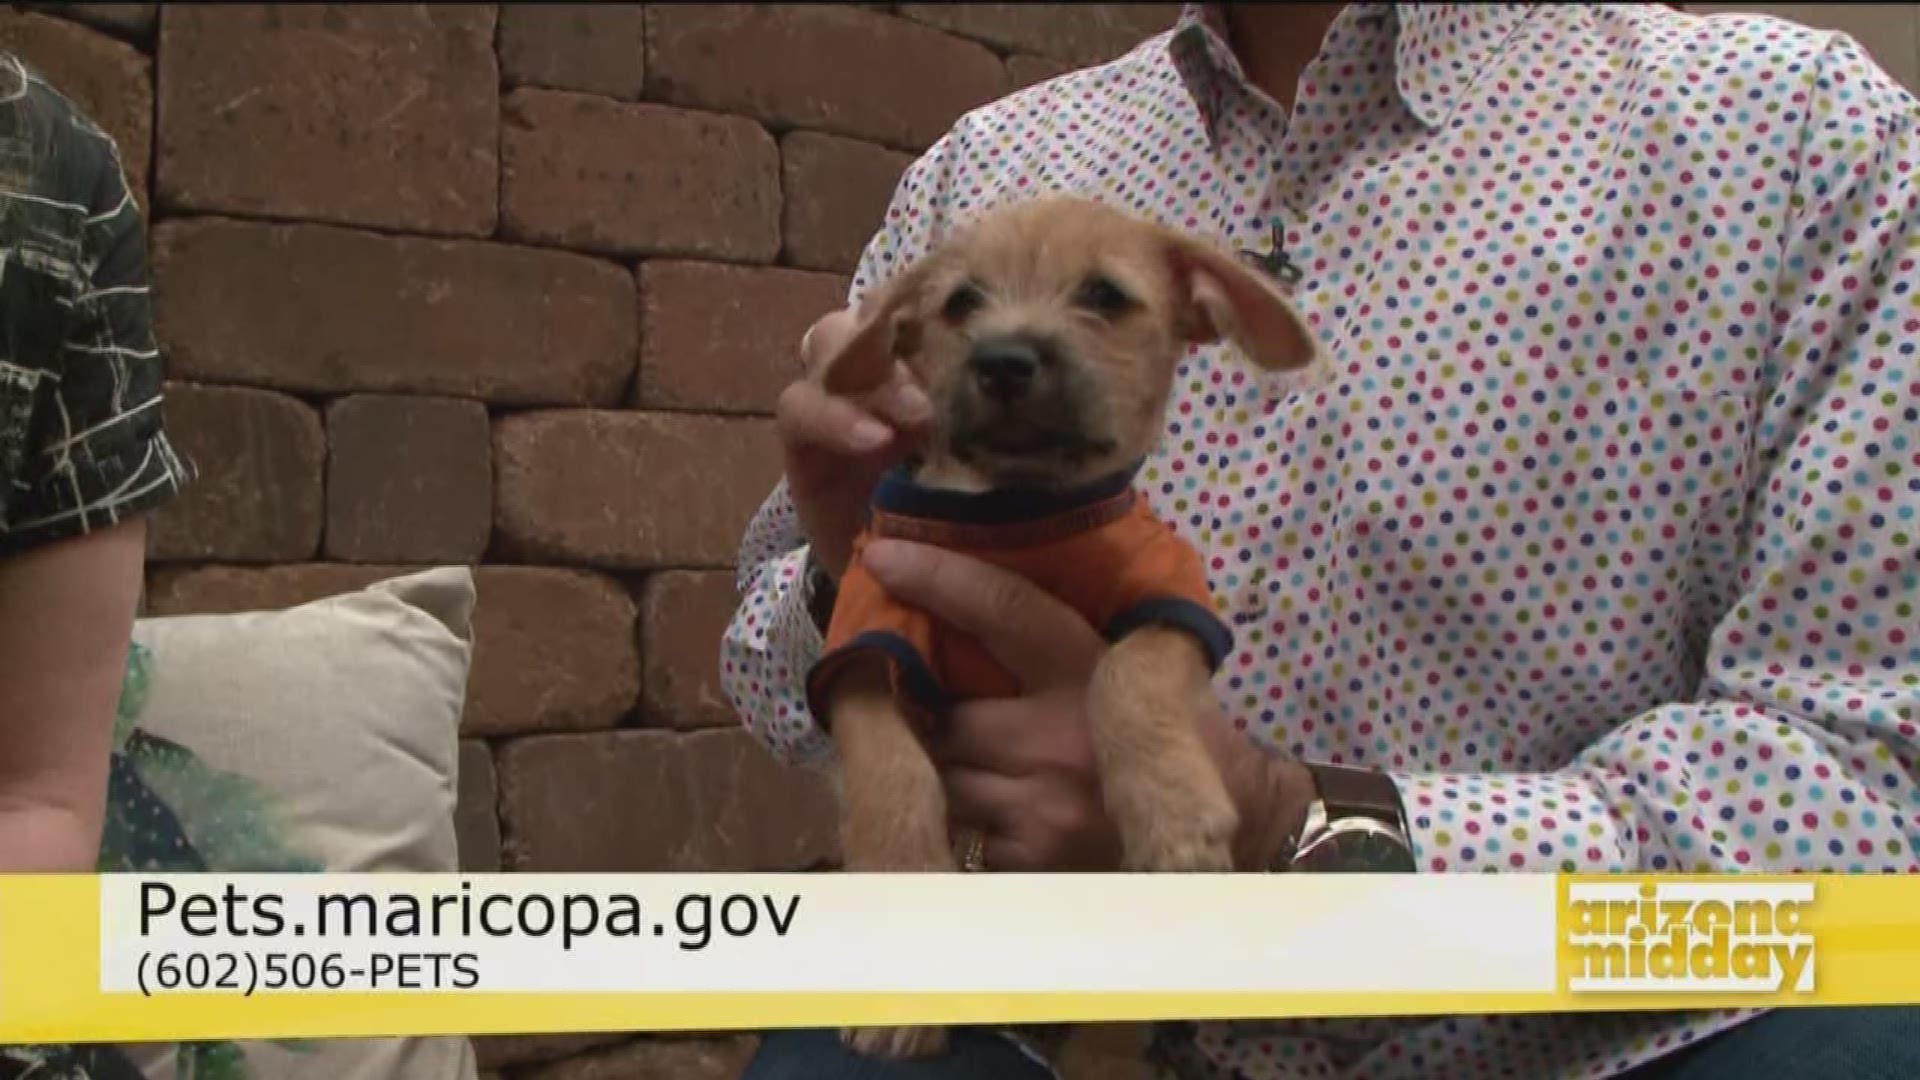 Jose Santiago and Samantha Wessell with Maricopa County Animal Care and Control give us the scoop on adopting a new pet